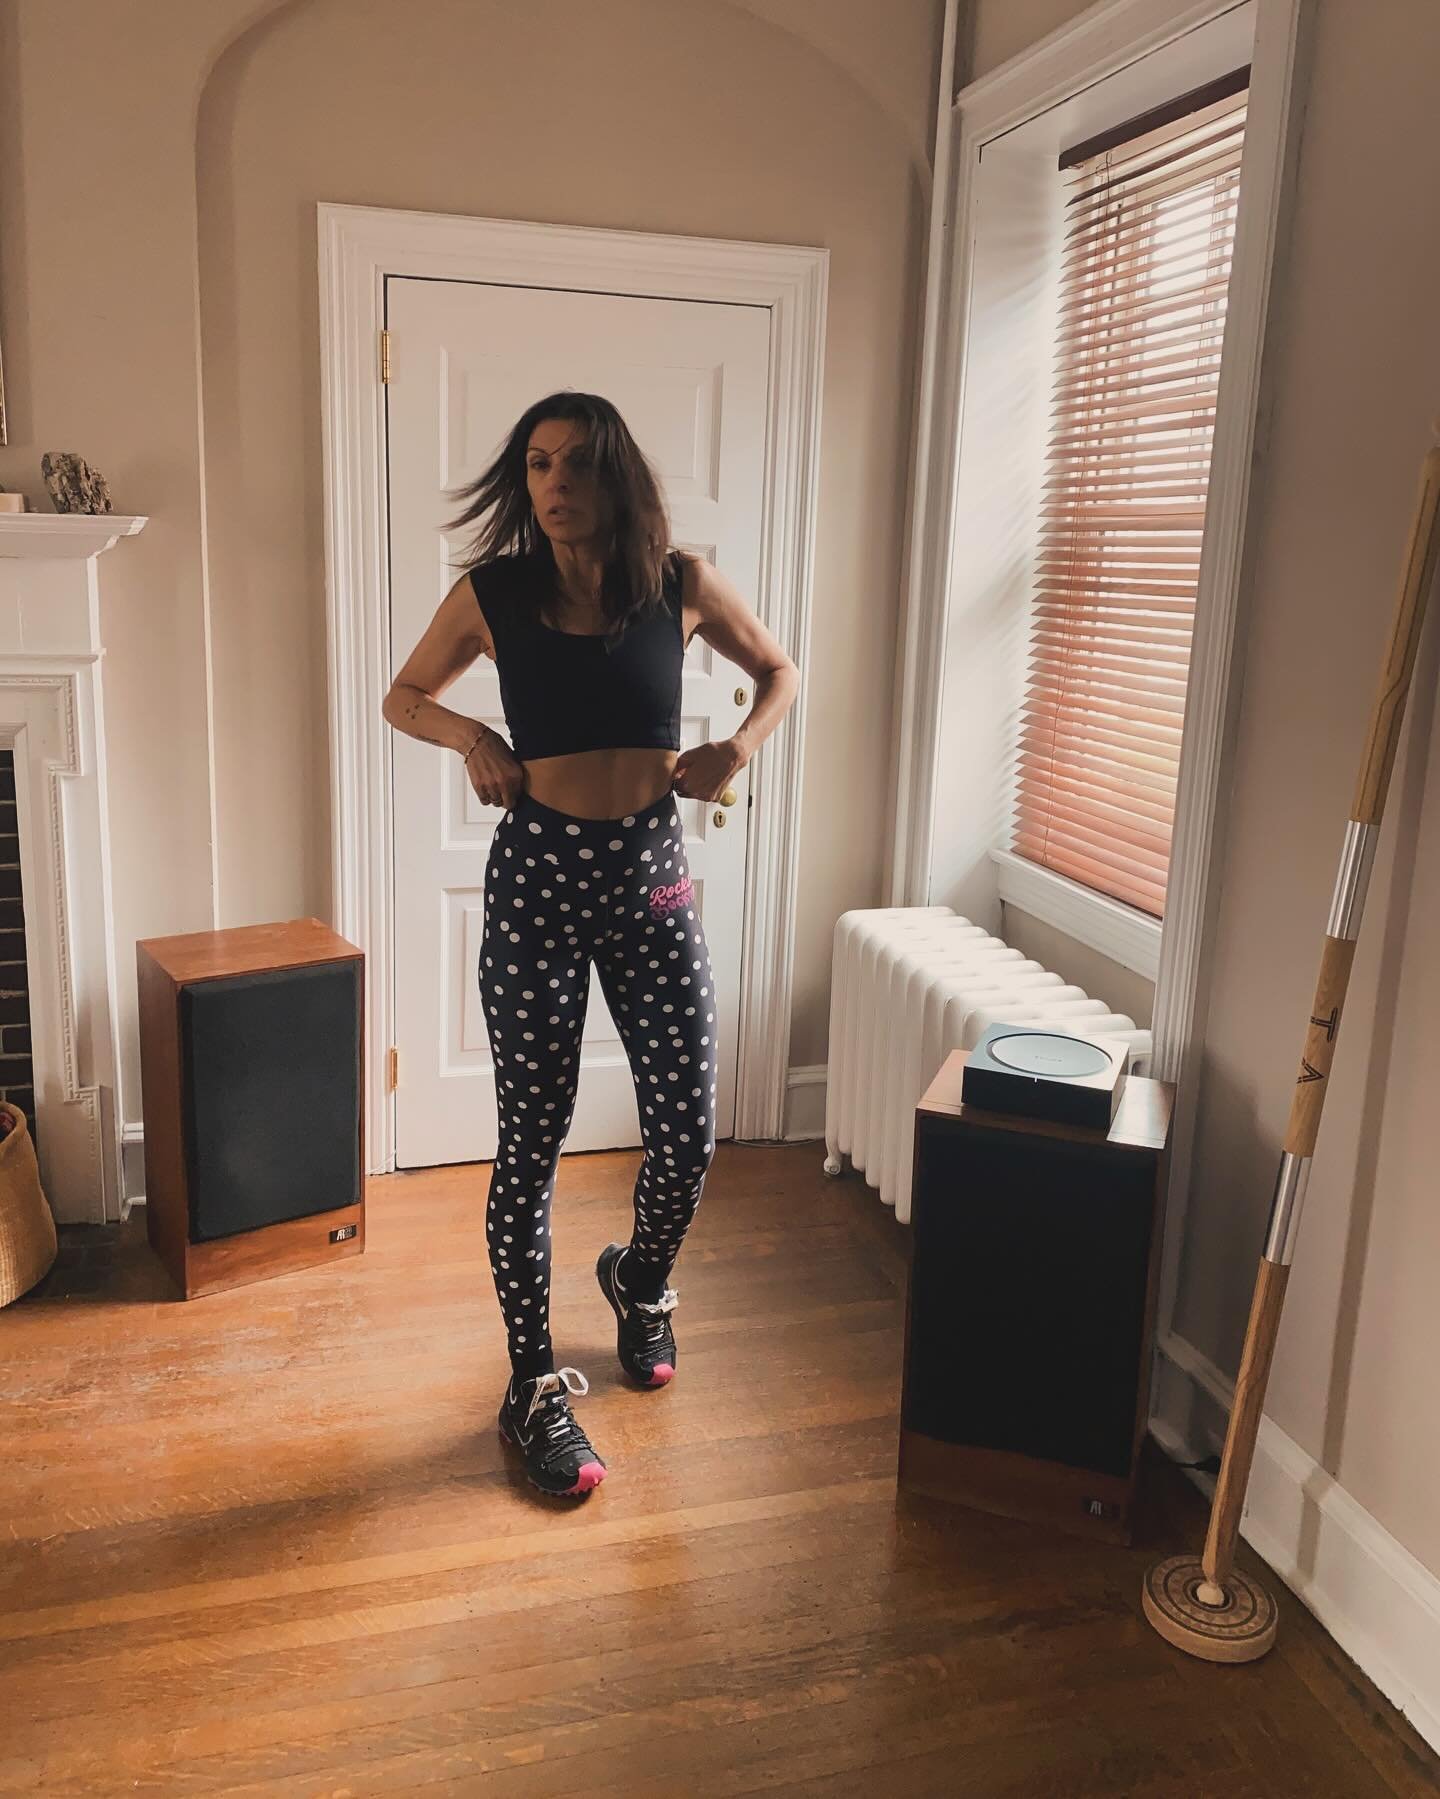 This summer&rsquo;s adorable trend: polka dots! Super cute and versatile, perfect for pairing with a variety of colors. Soft buttery leggings with just the right amount of stretch and spandex. So comfy you really won&rsquo;t want to take them off @fo